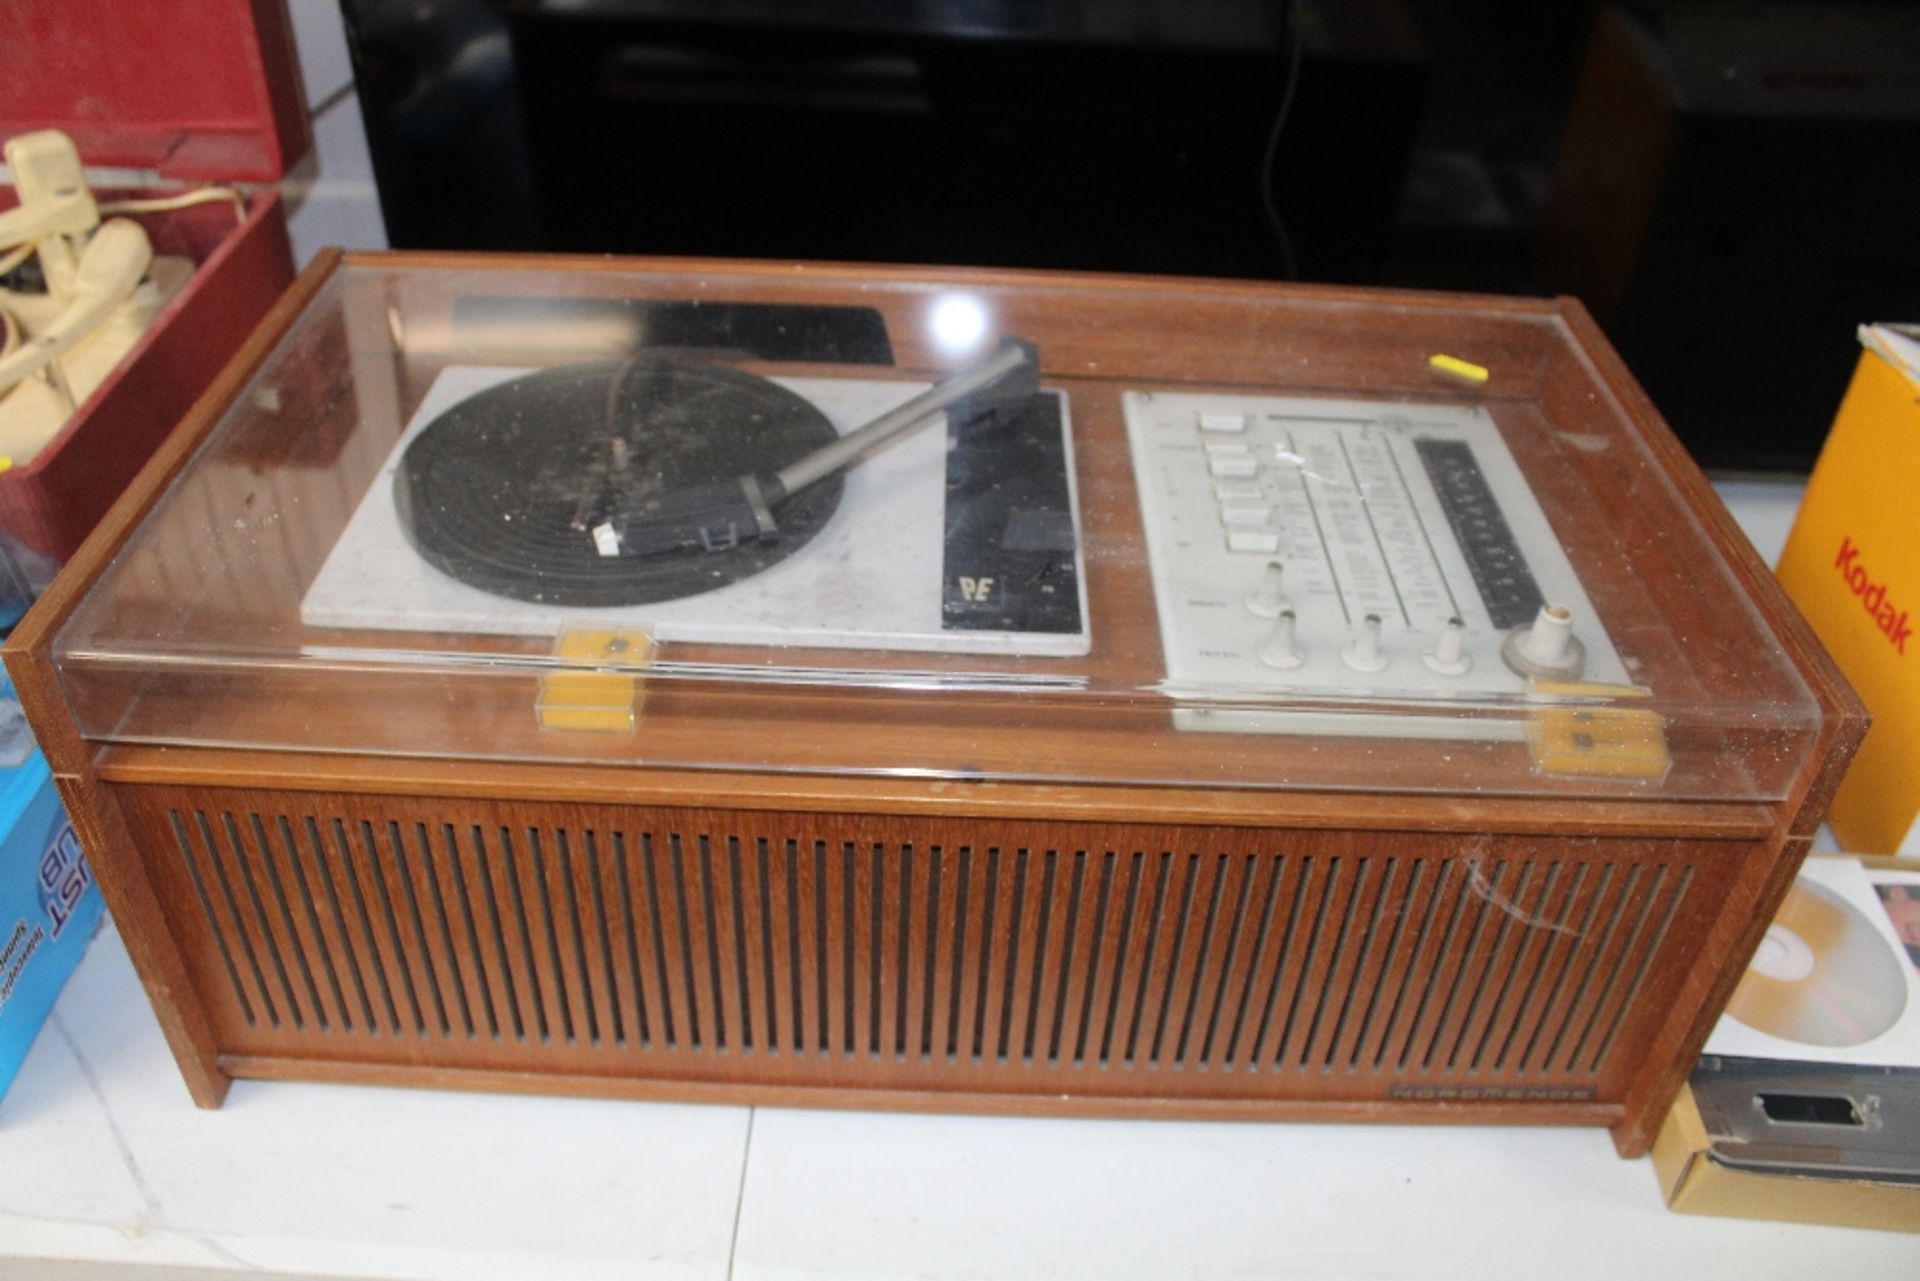 A Nordmende record player